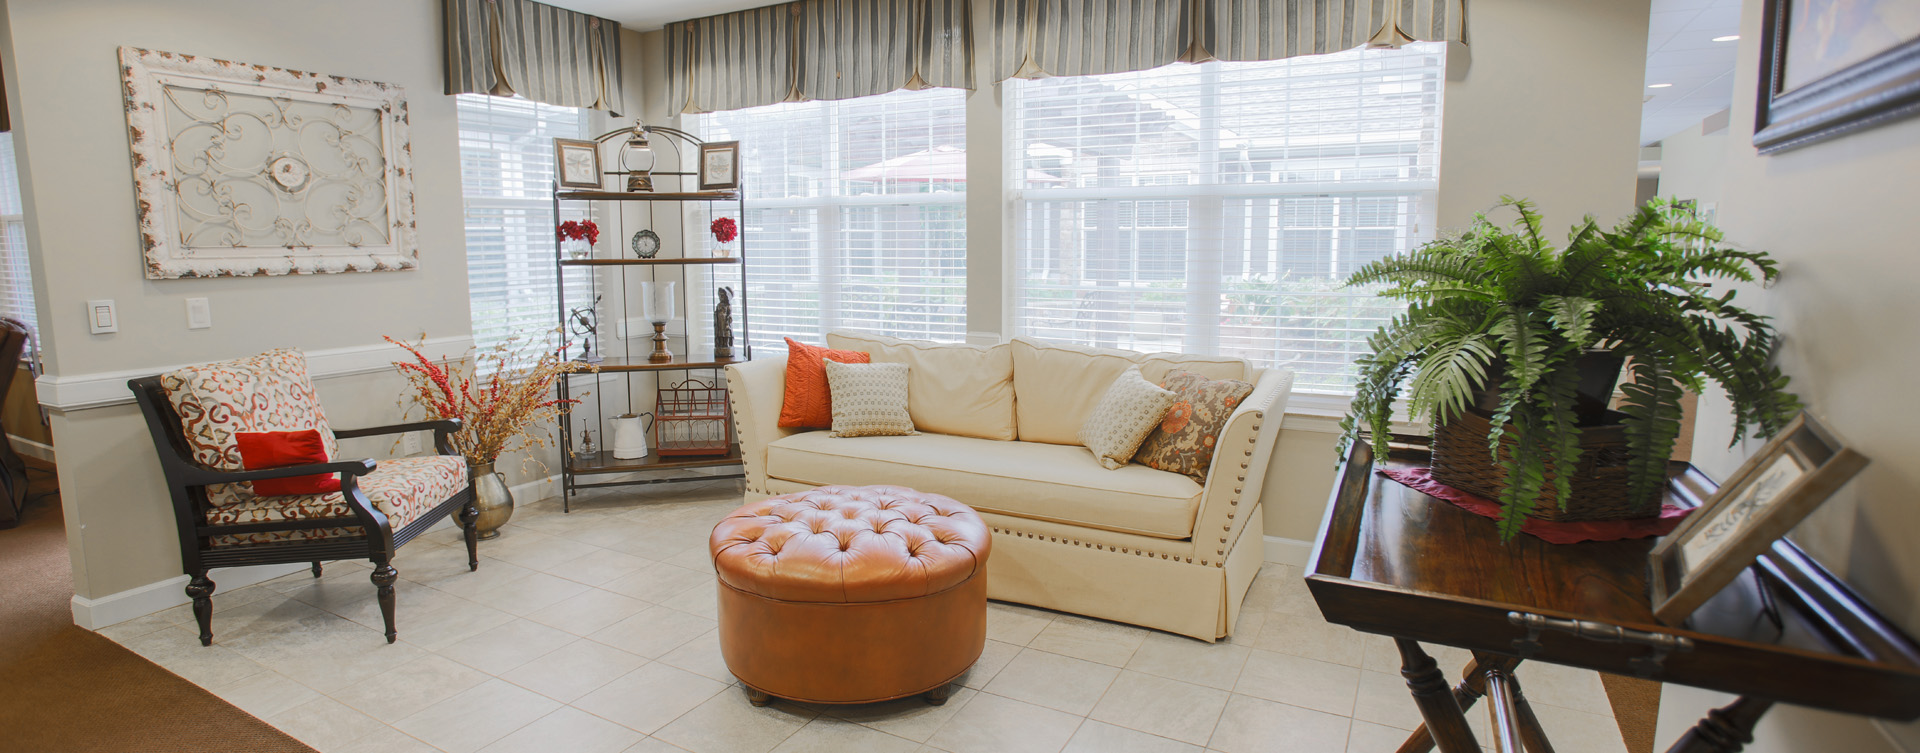 Relax in the warmth of the sunroom at Bickford of Carmel